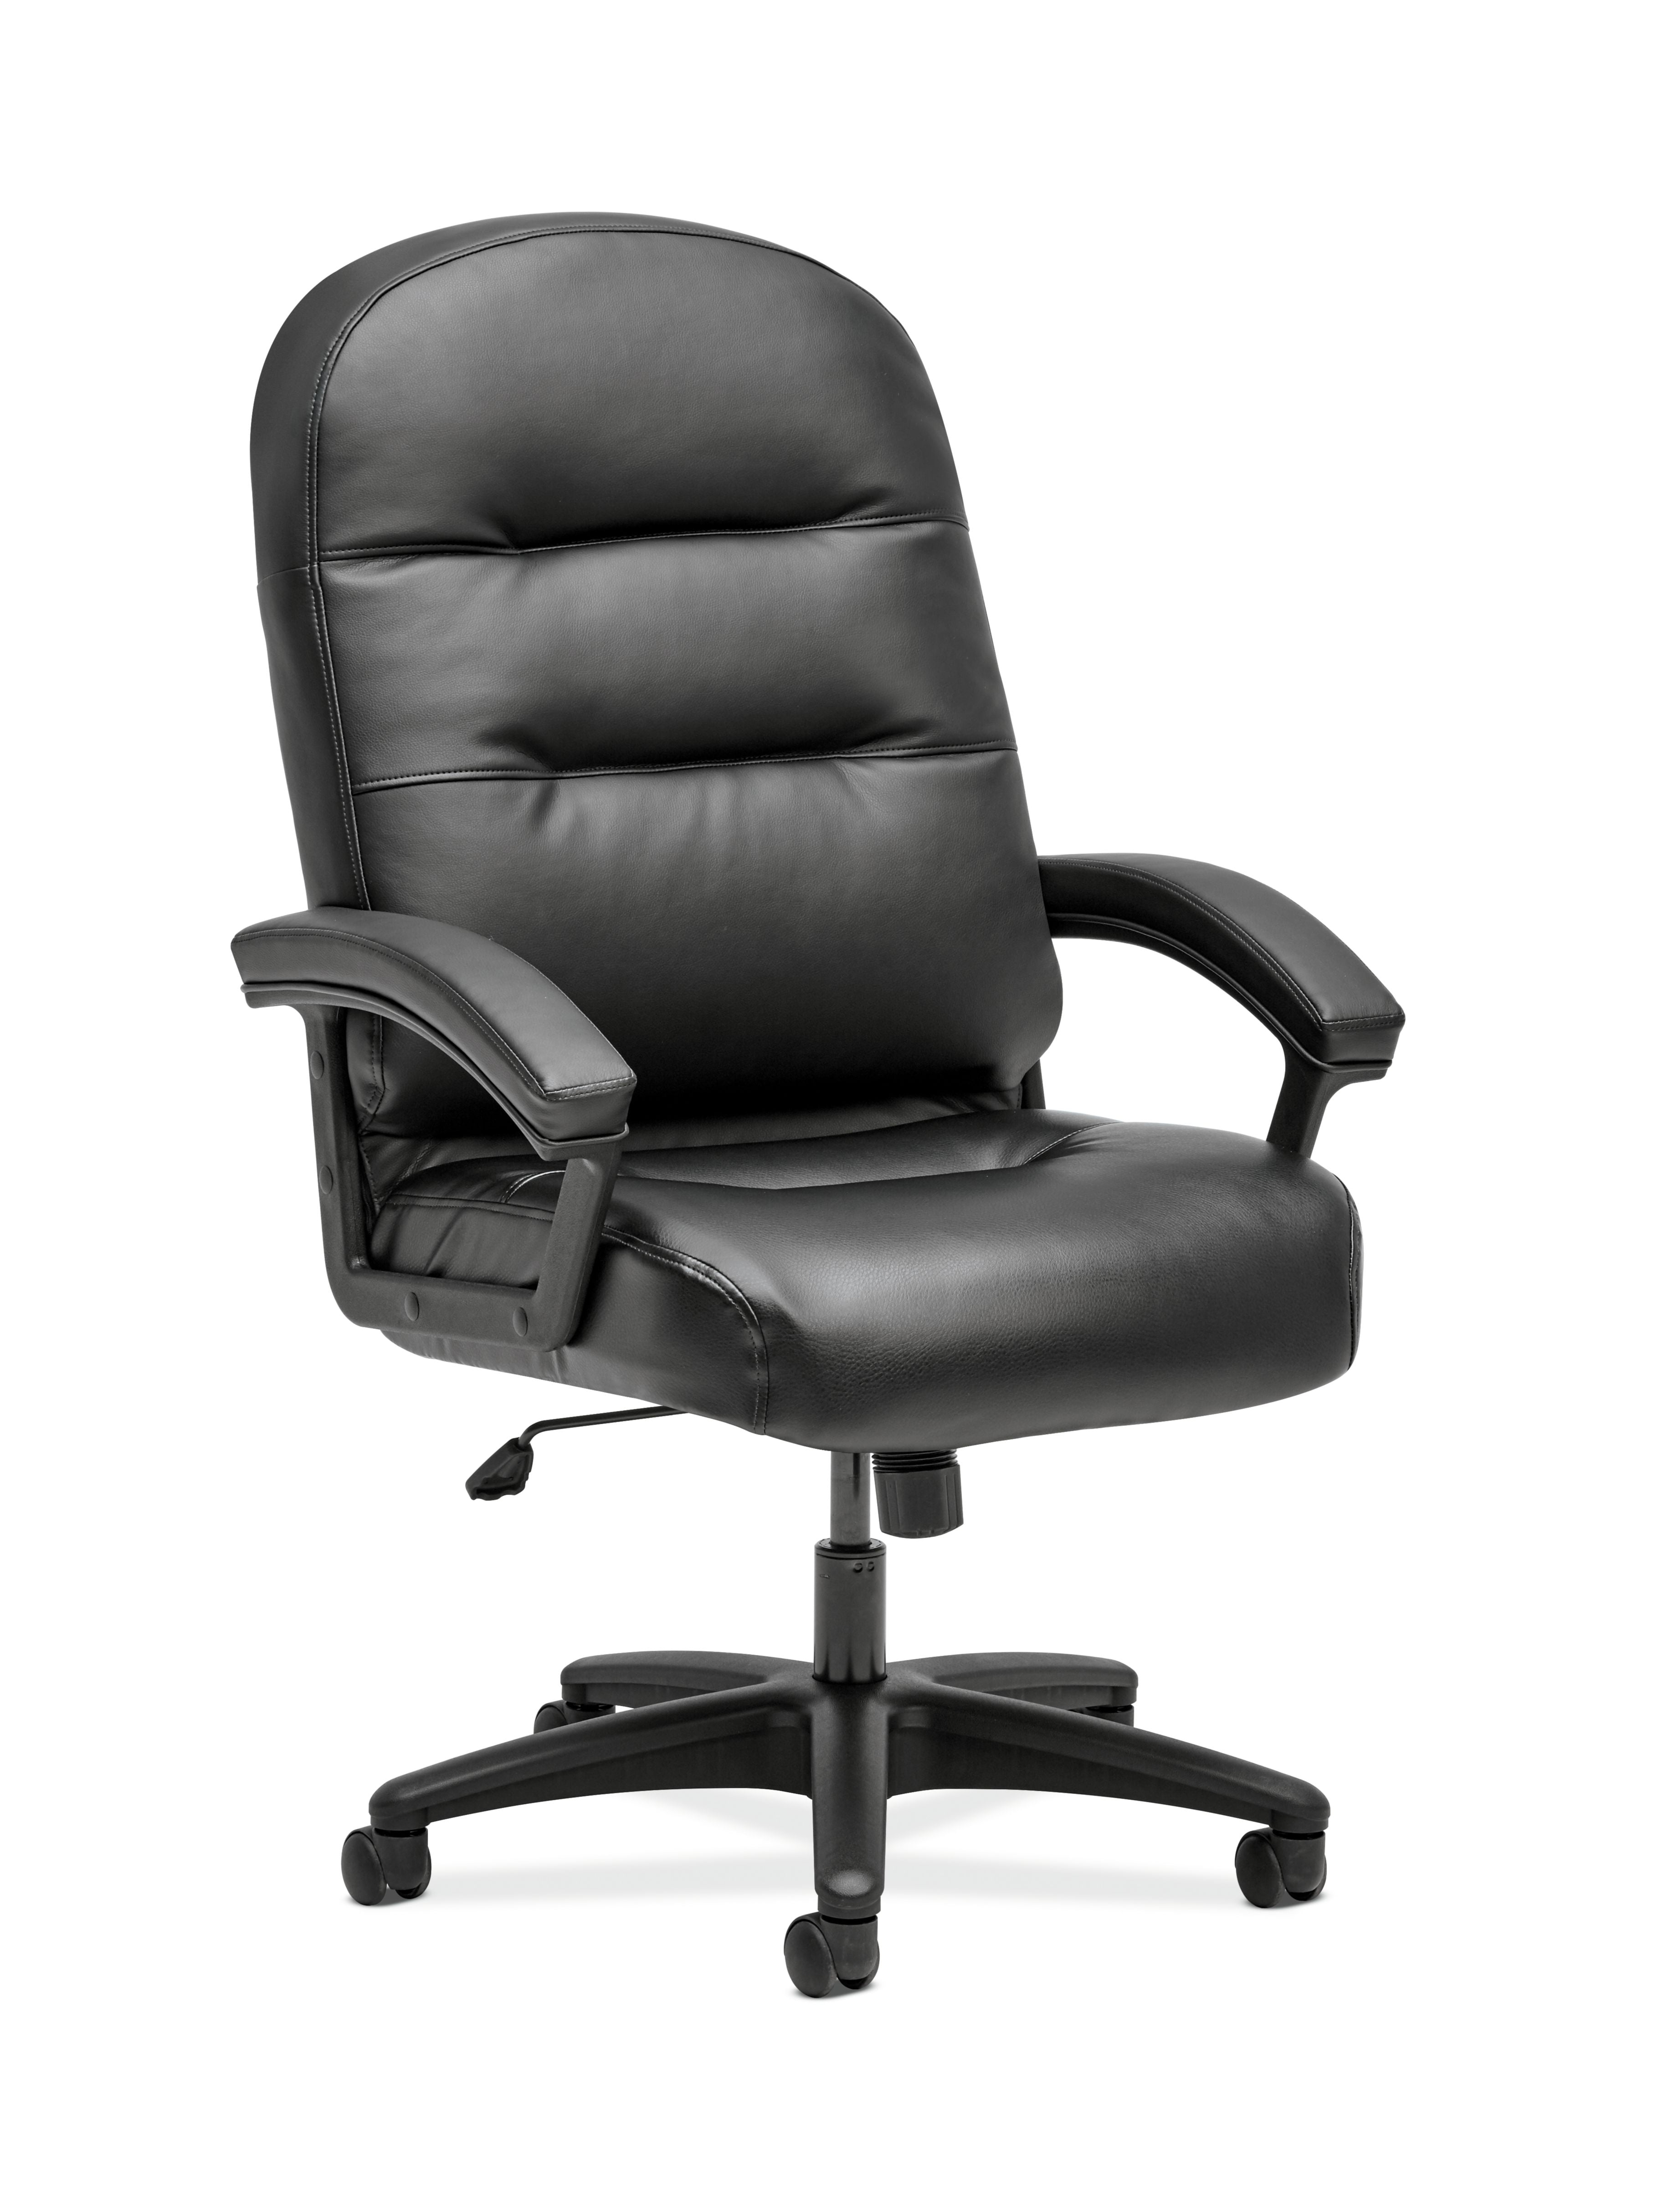 HON Pillow-Soft Executive Chair - High-Back Leather Computer Chair for